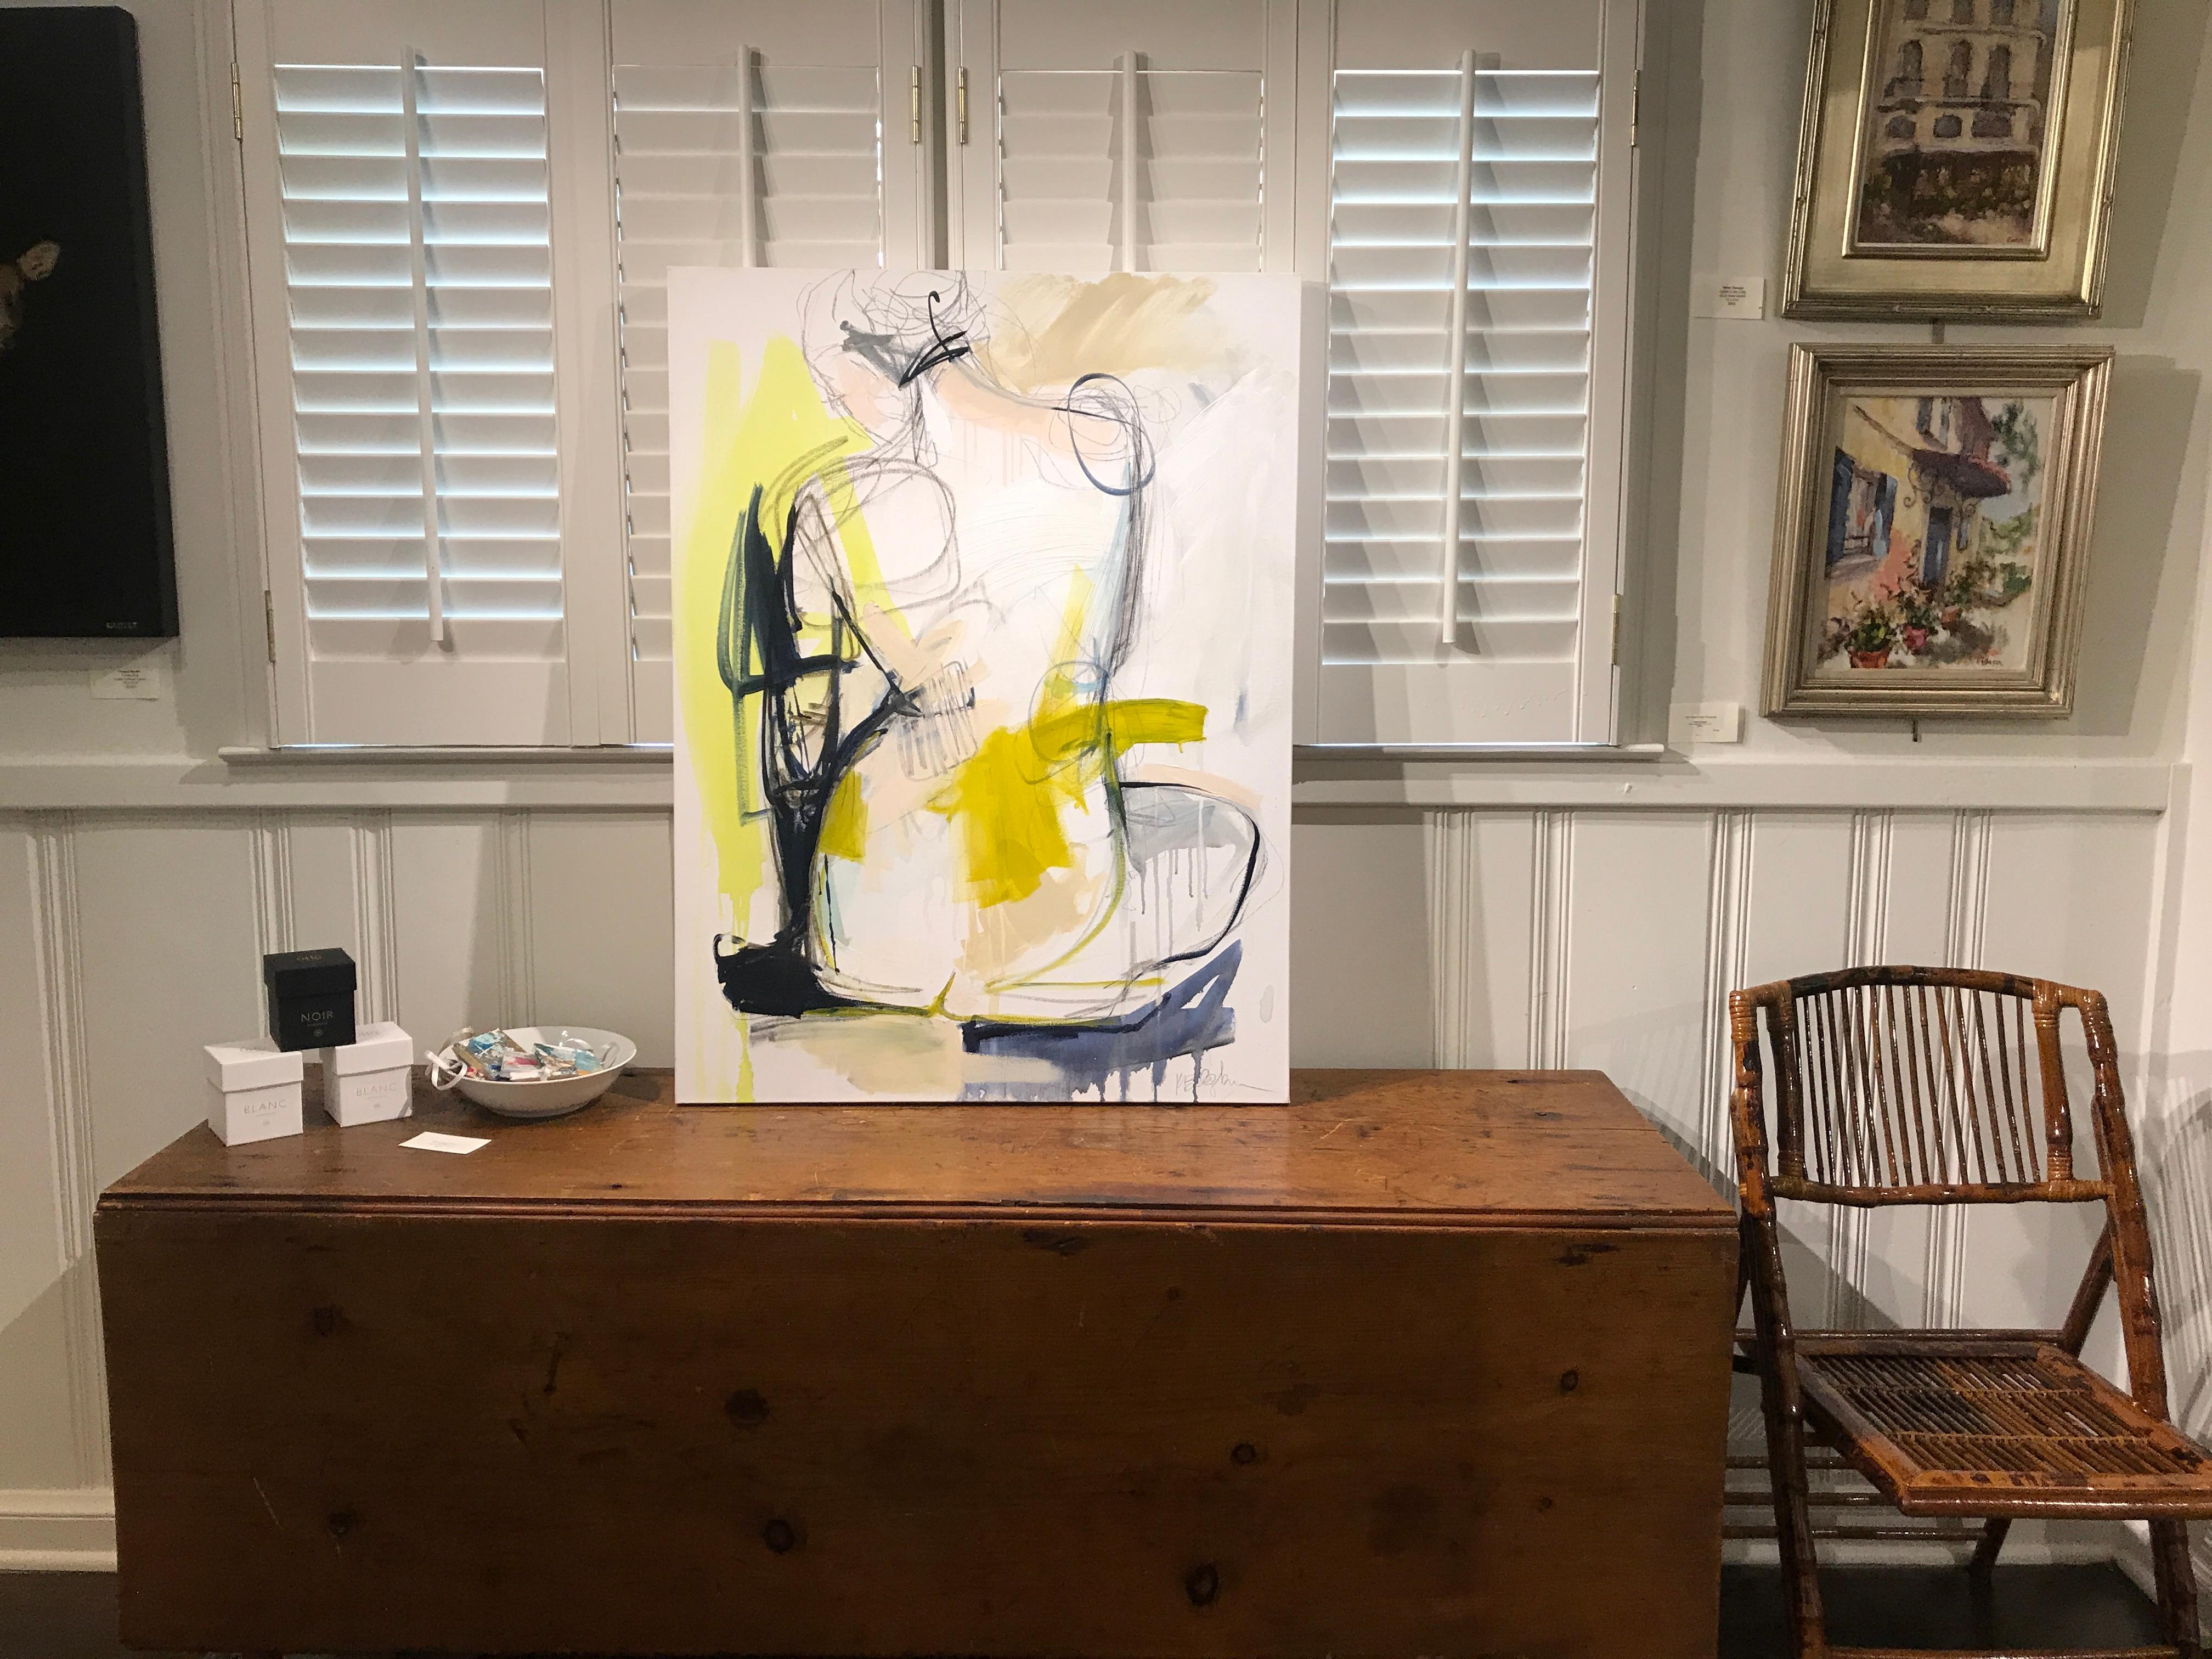 'Tuck' is an abstract mixed media on canvas nude painting of medium size created by American artist Kelley Ogburn in 2019. Featuring a palette made of yellow, white, black, grey and pink tones, this painting draws our attention with its bold and